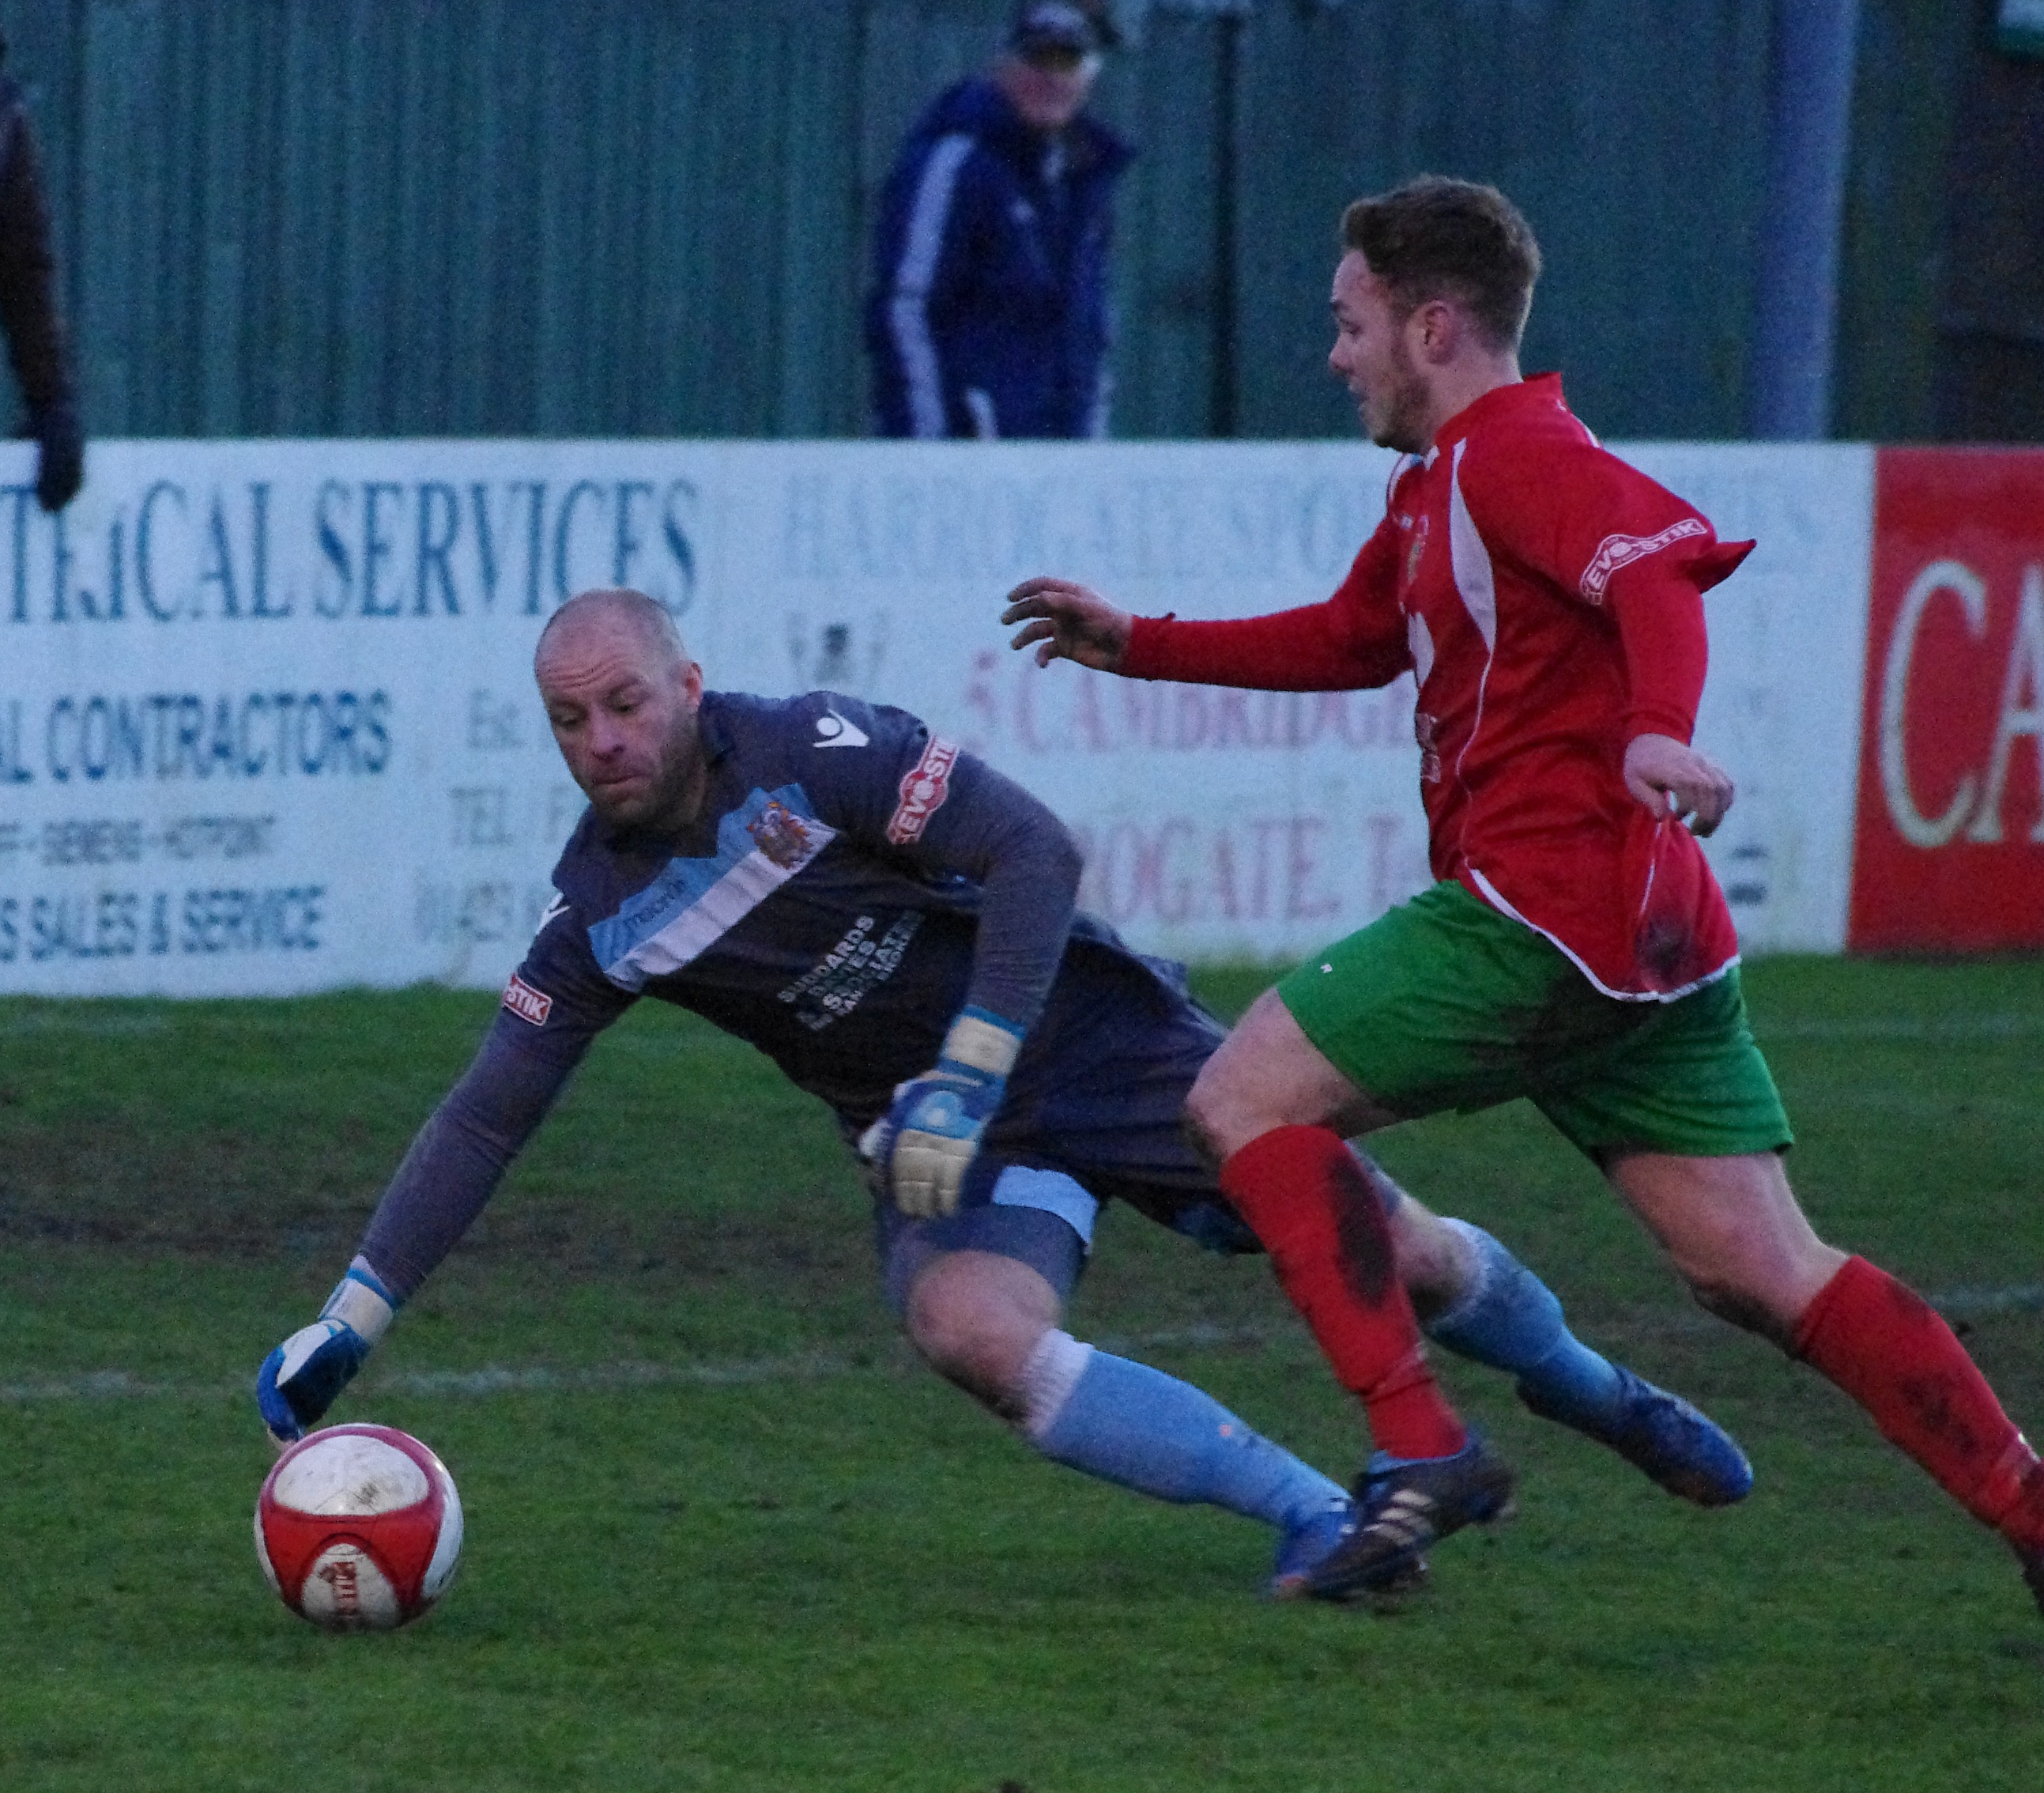 Tom Morgan was adjudged to have fouled Nathan Cartman for Railway's missed penalty